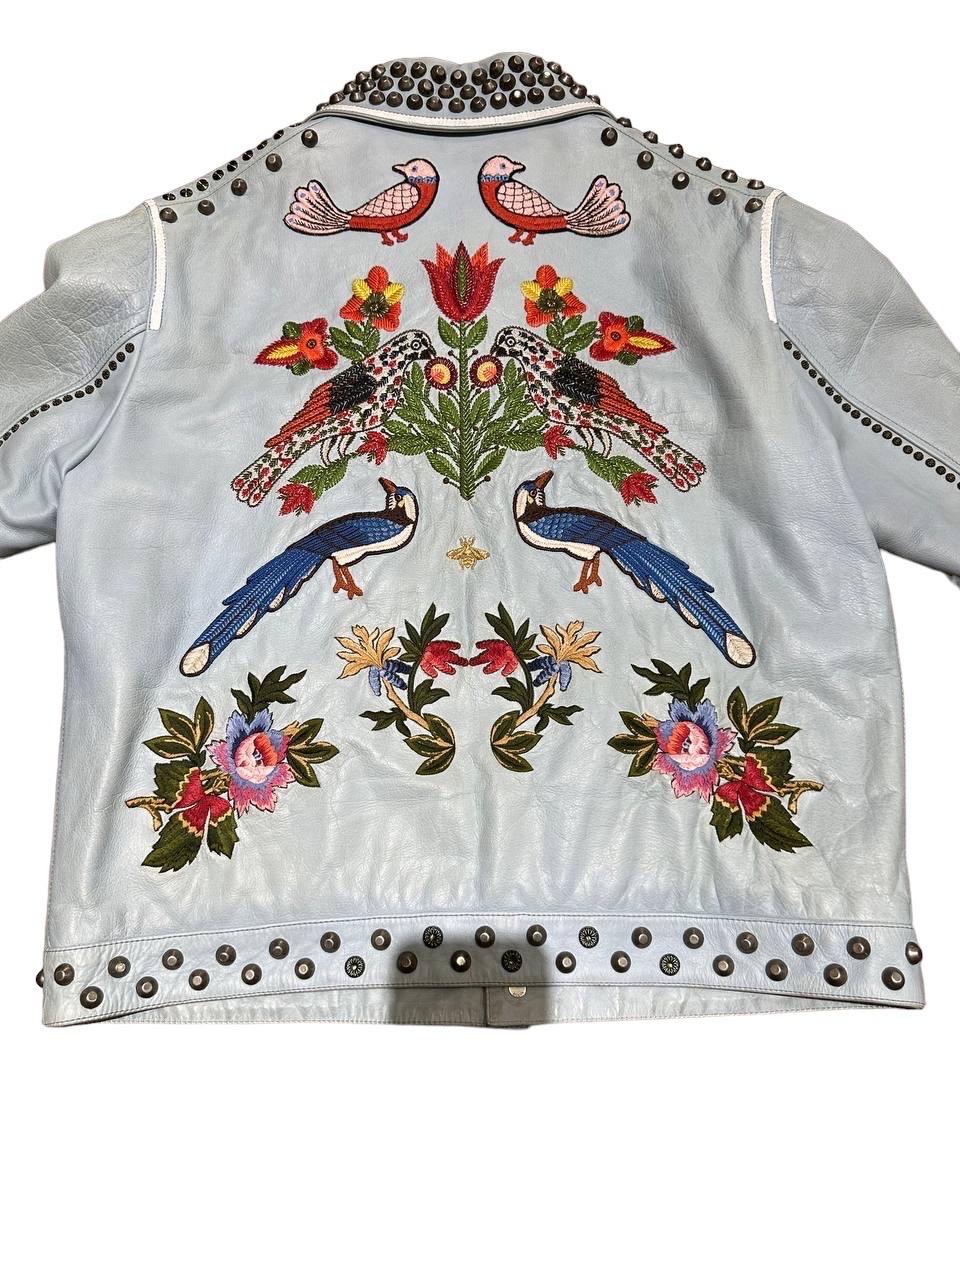 Gucci Leather Jacket Light Blue Floreal Embroidery For Sale 2